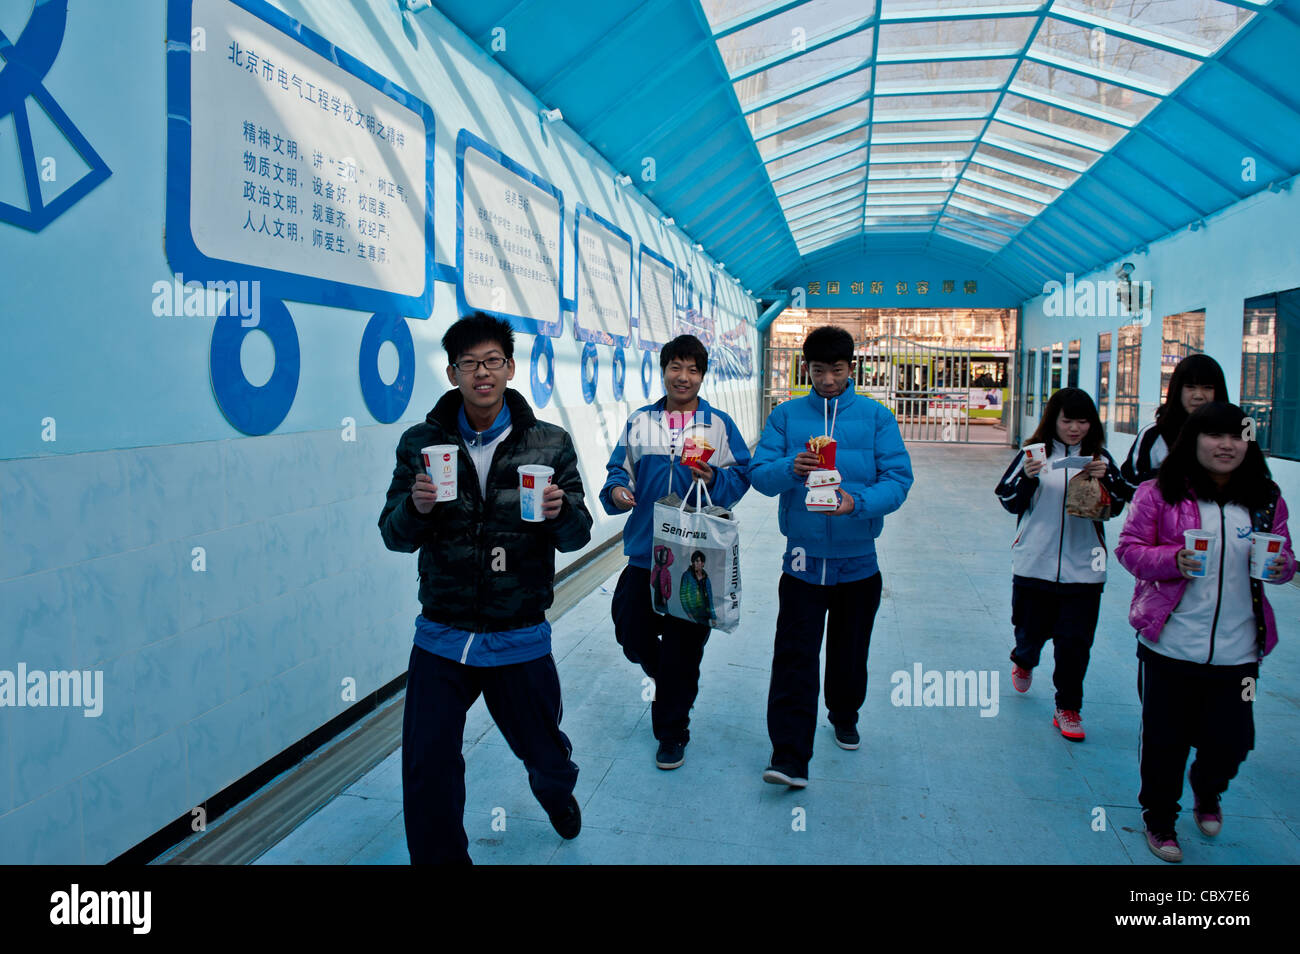 Beijing, Students with McDonald's take away food at the entrance of the Beijing Electrical Engineering School Stock Photo